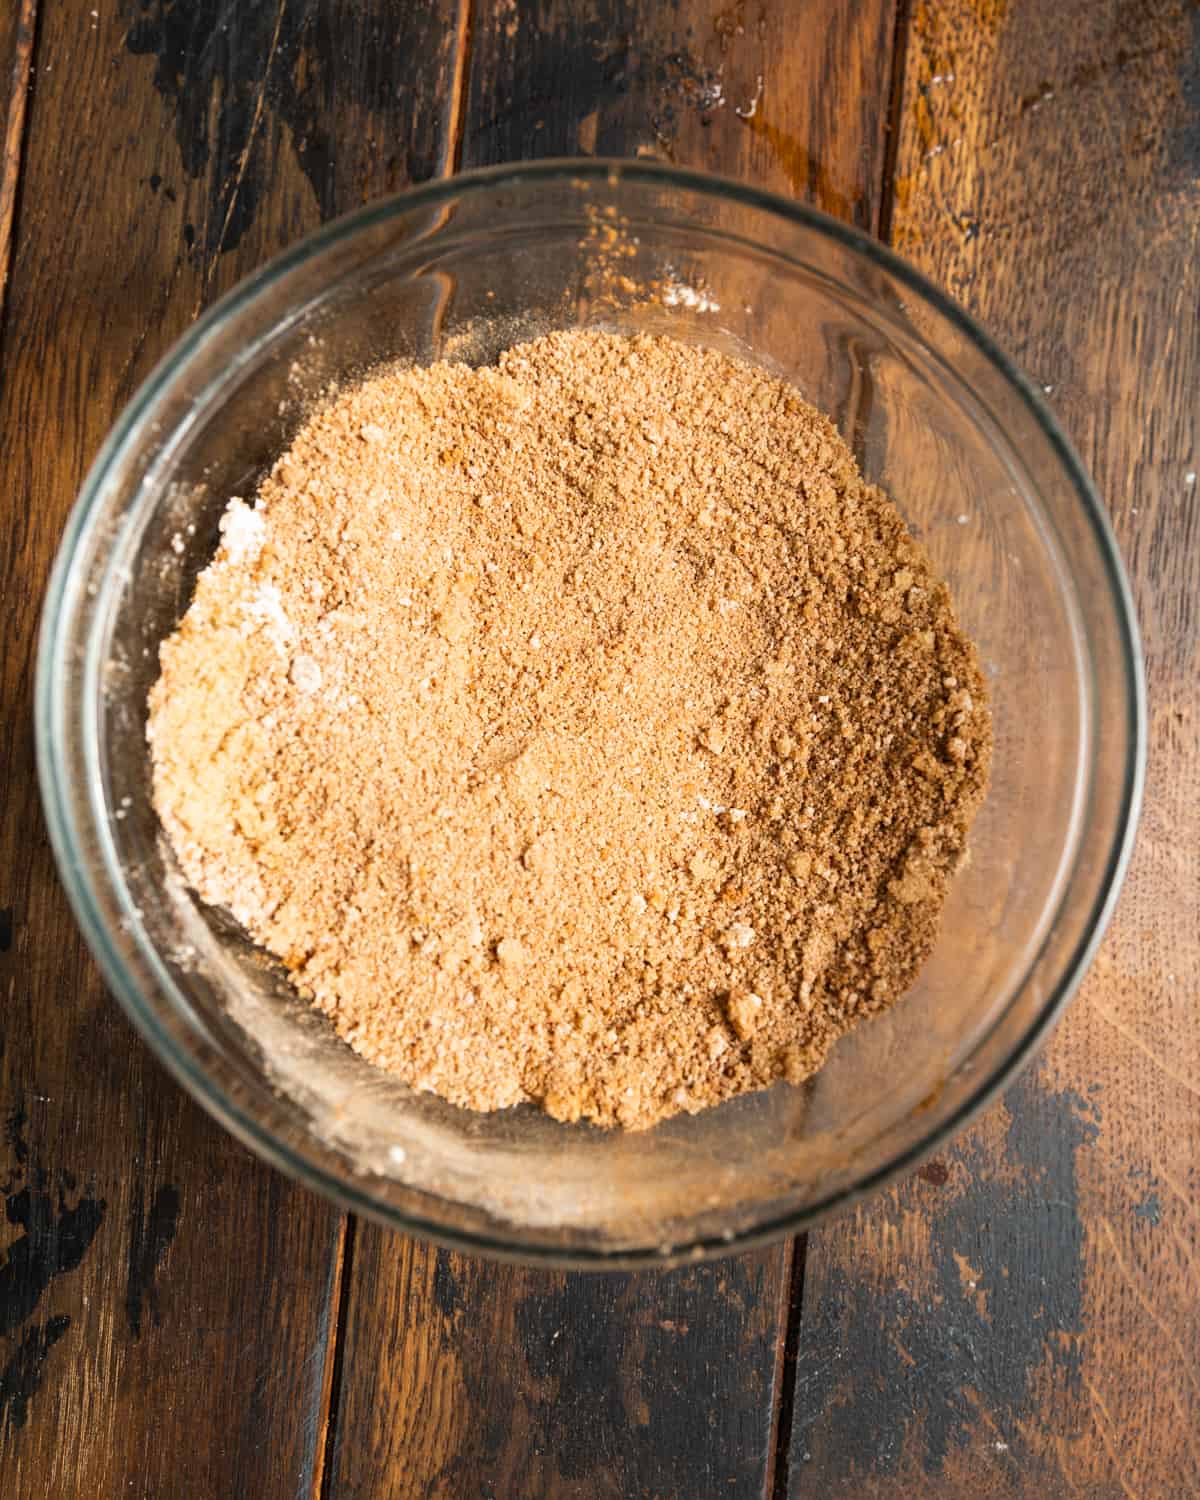 Brown sugar and various spices in a small glass mixing bowl on a wooden table.